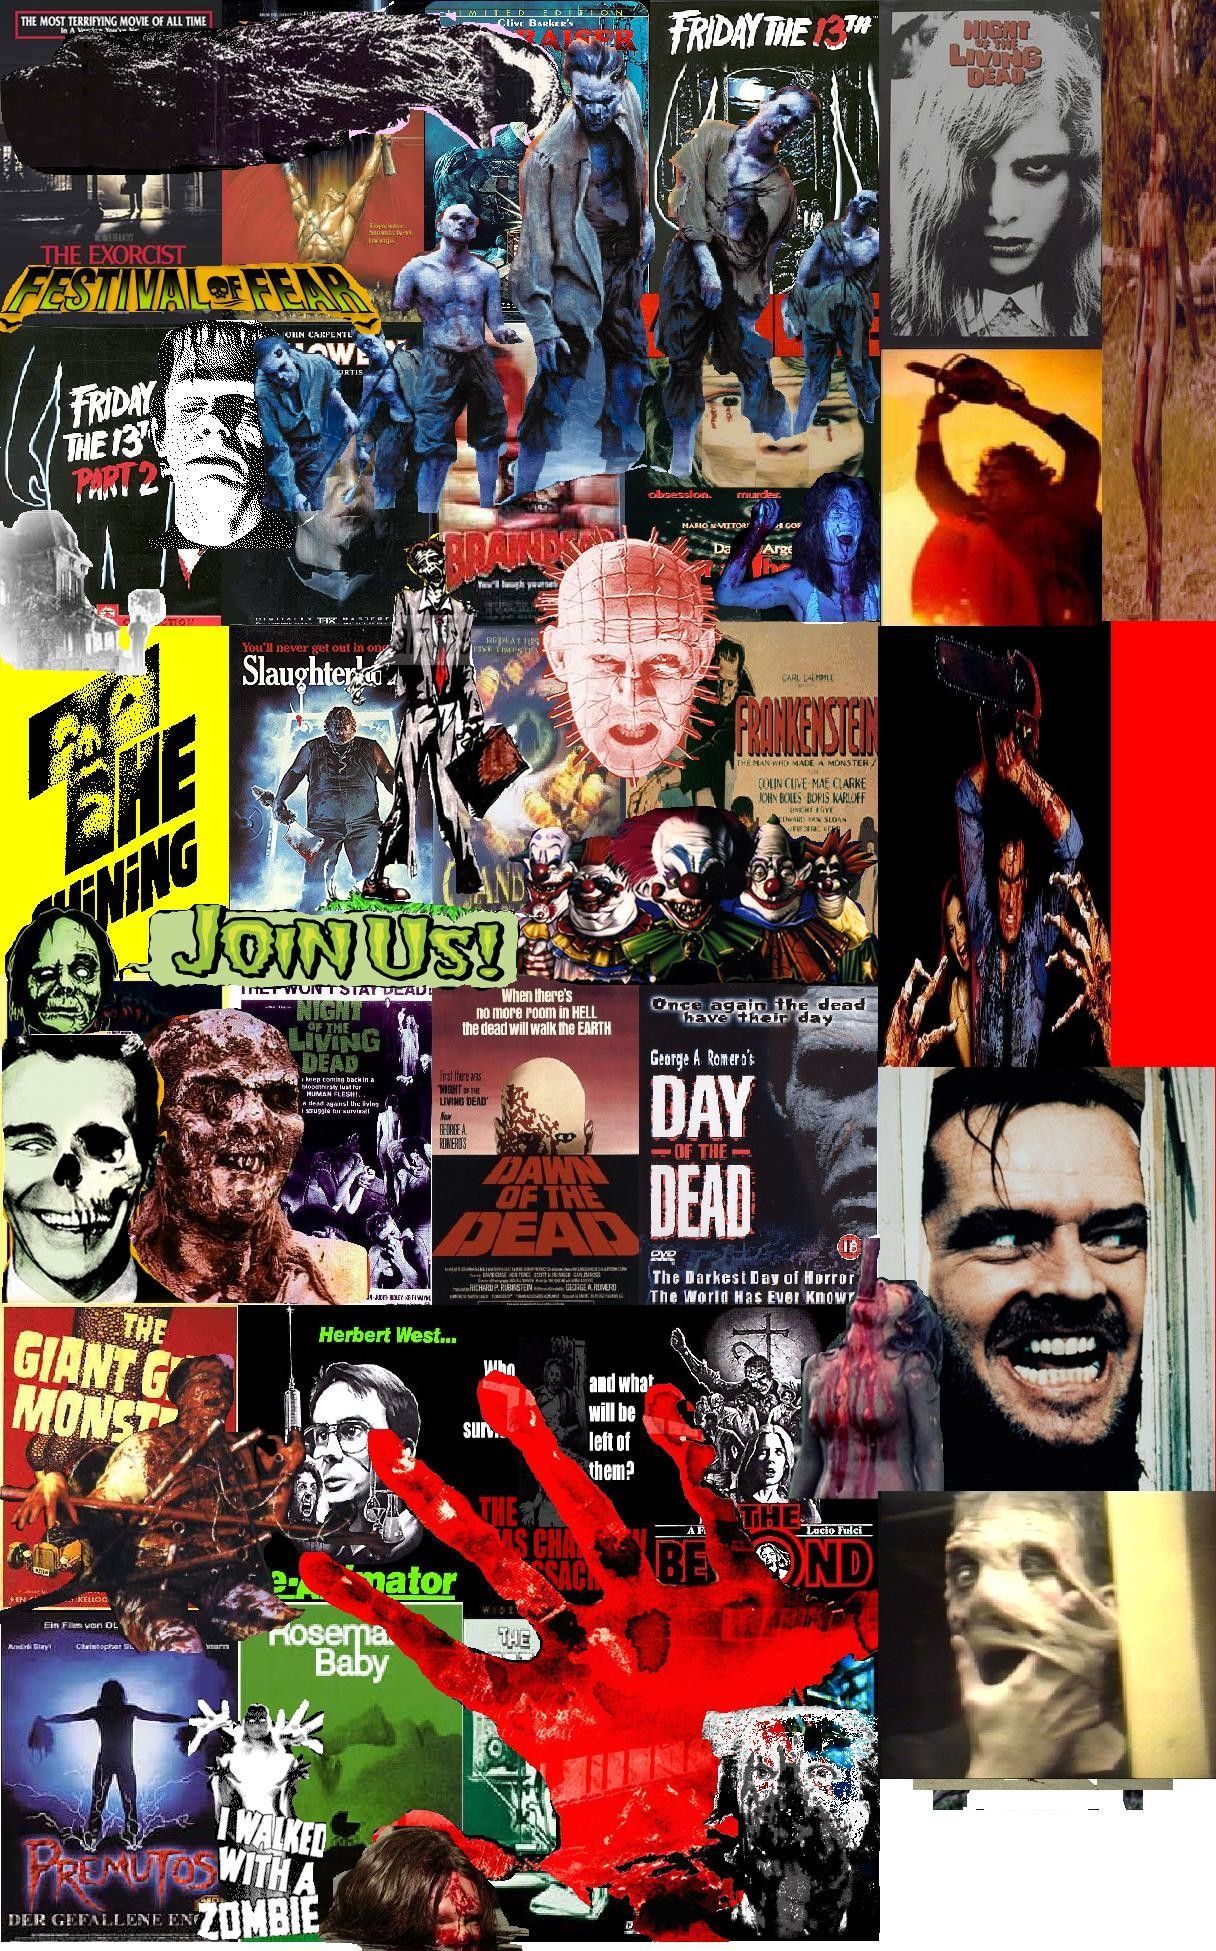 Horror Movie Collage Wallpaper posted .cutewallpaper.org